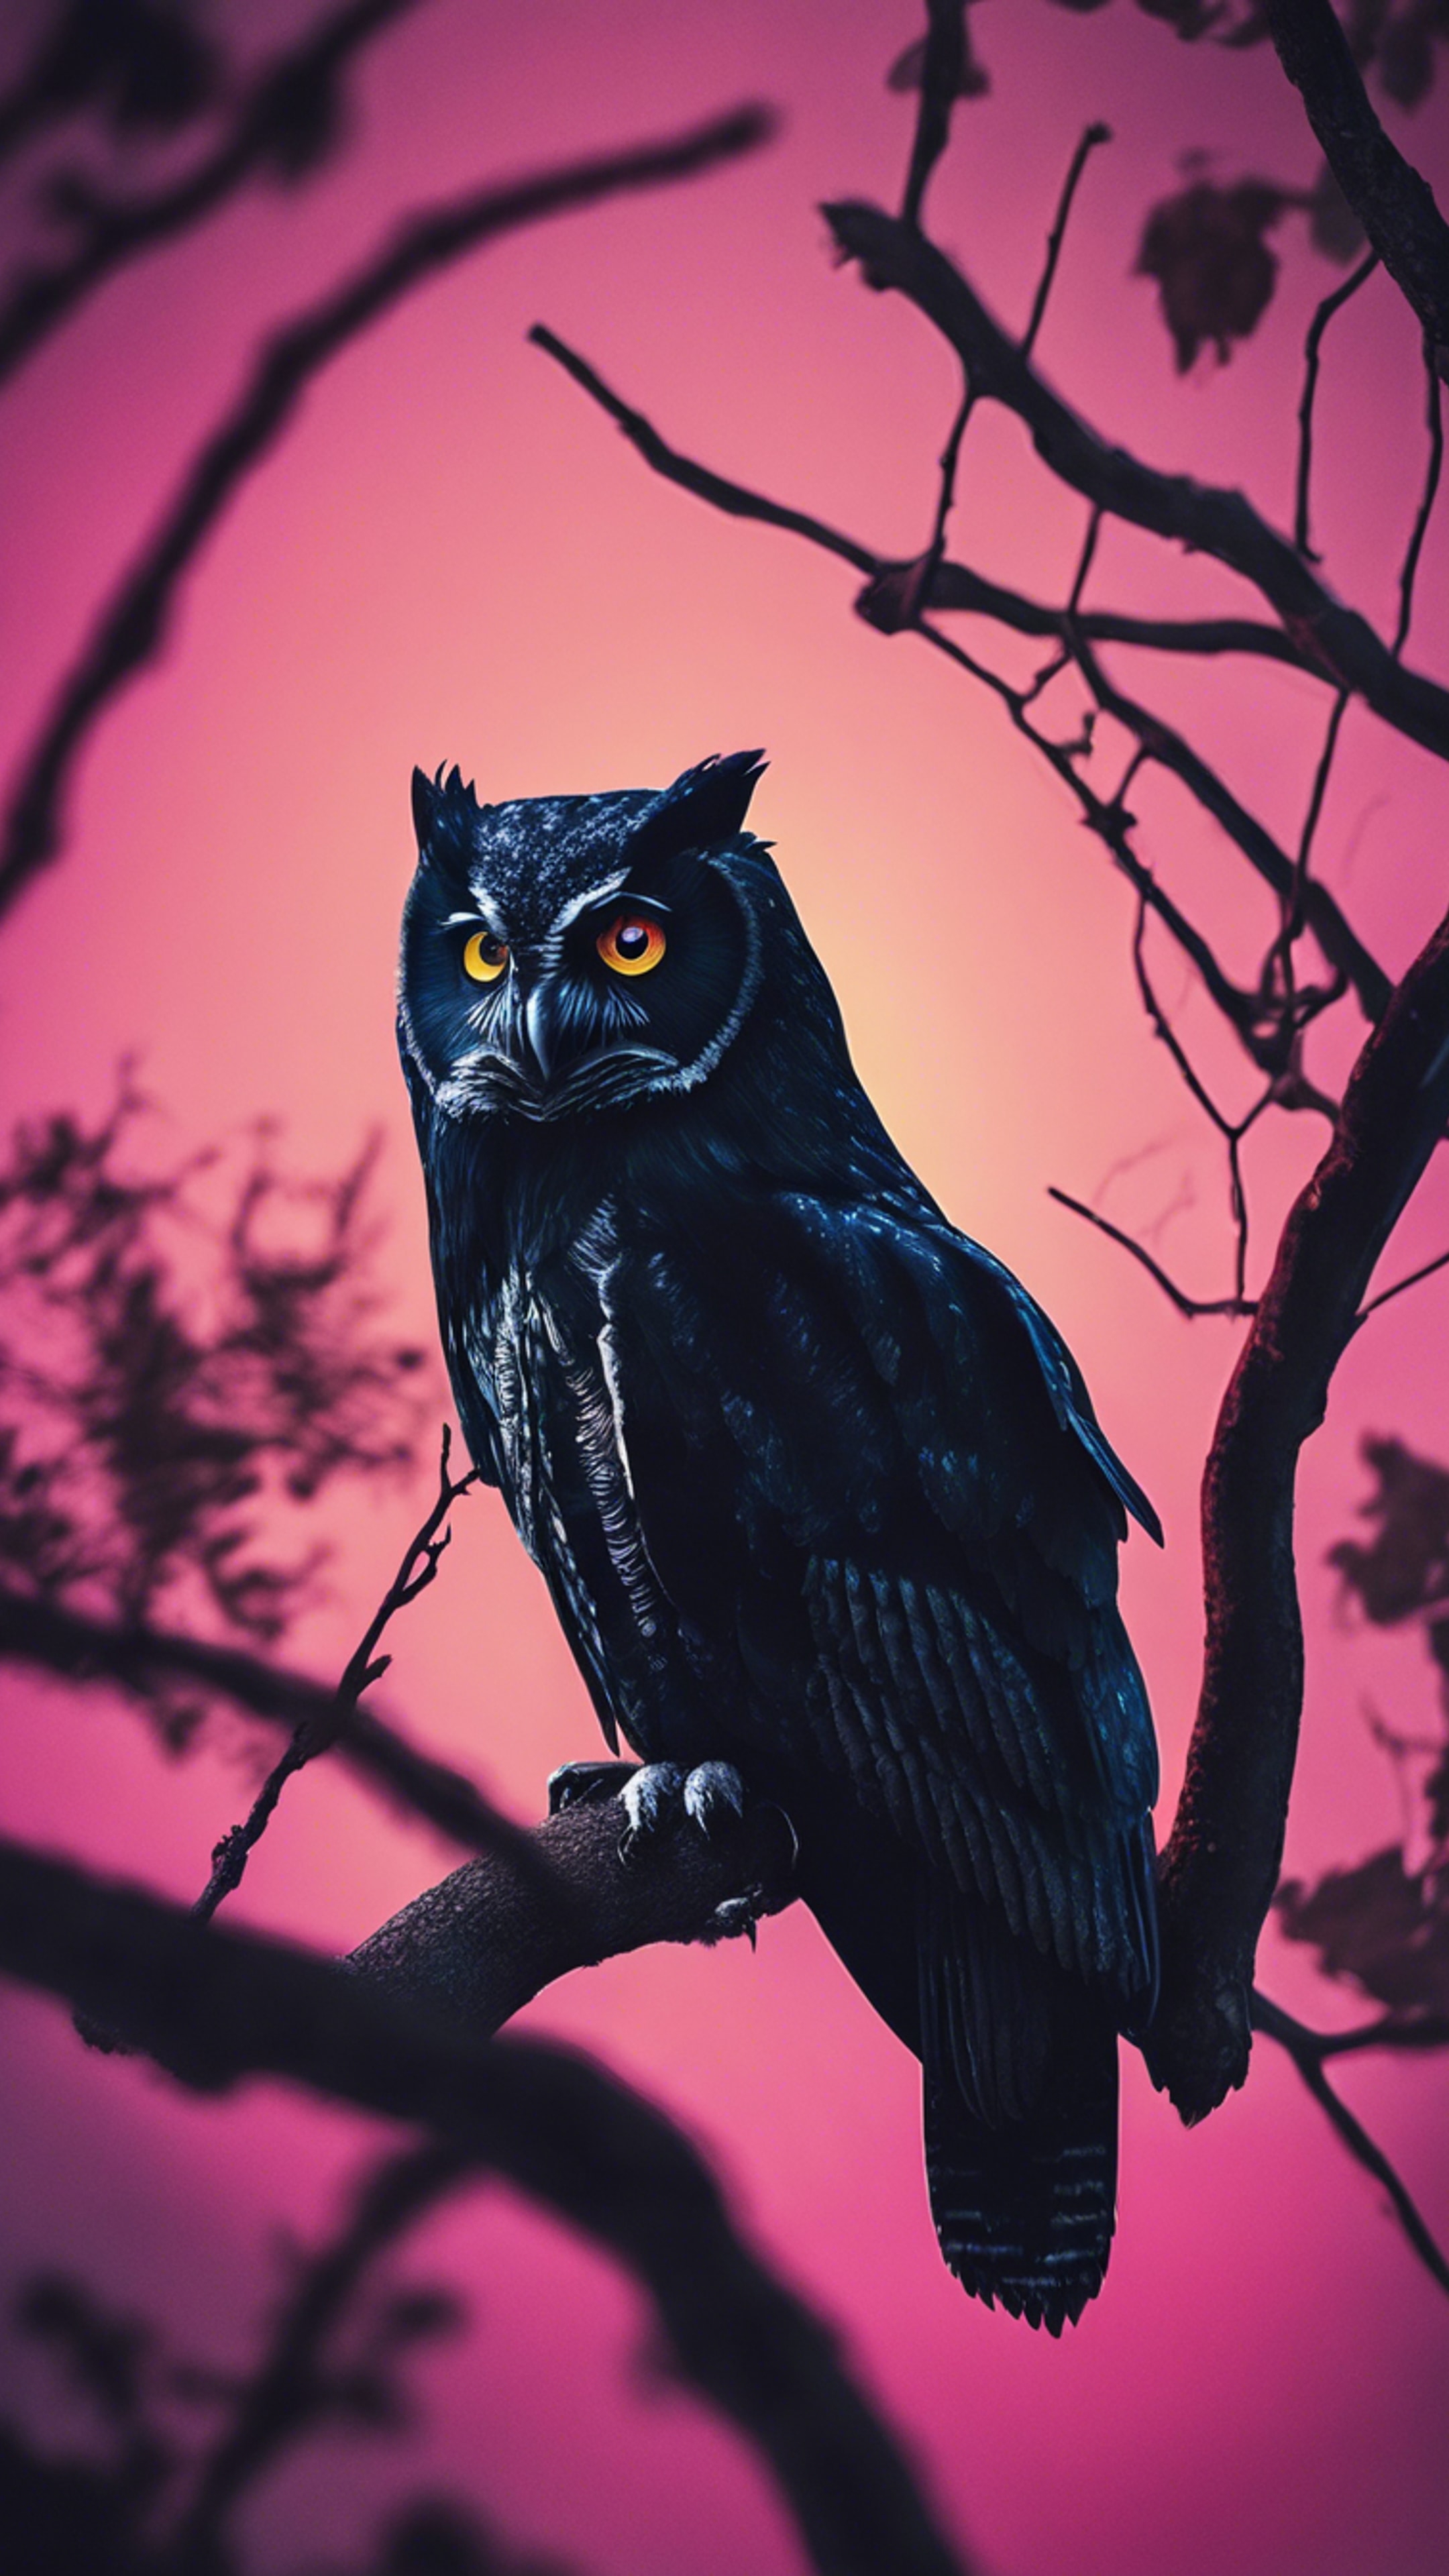 A pitch black owl, its eyes glowing in cool neon colors, perched on a tree branch on a moonless night. Wallpaper[de9c9fccdafb4c81814c]